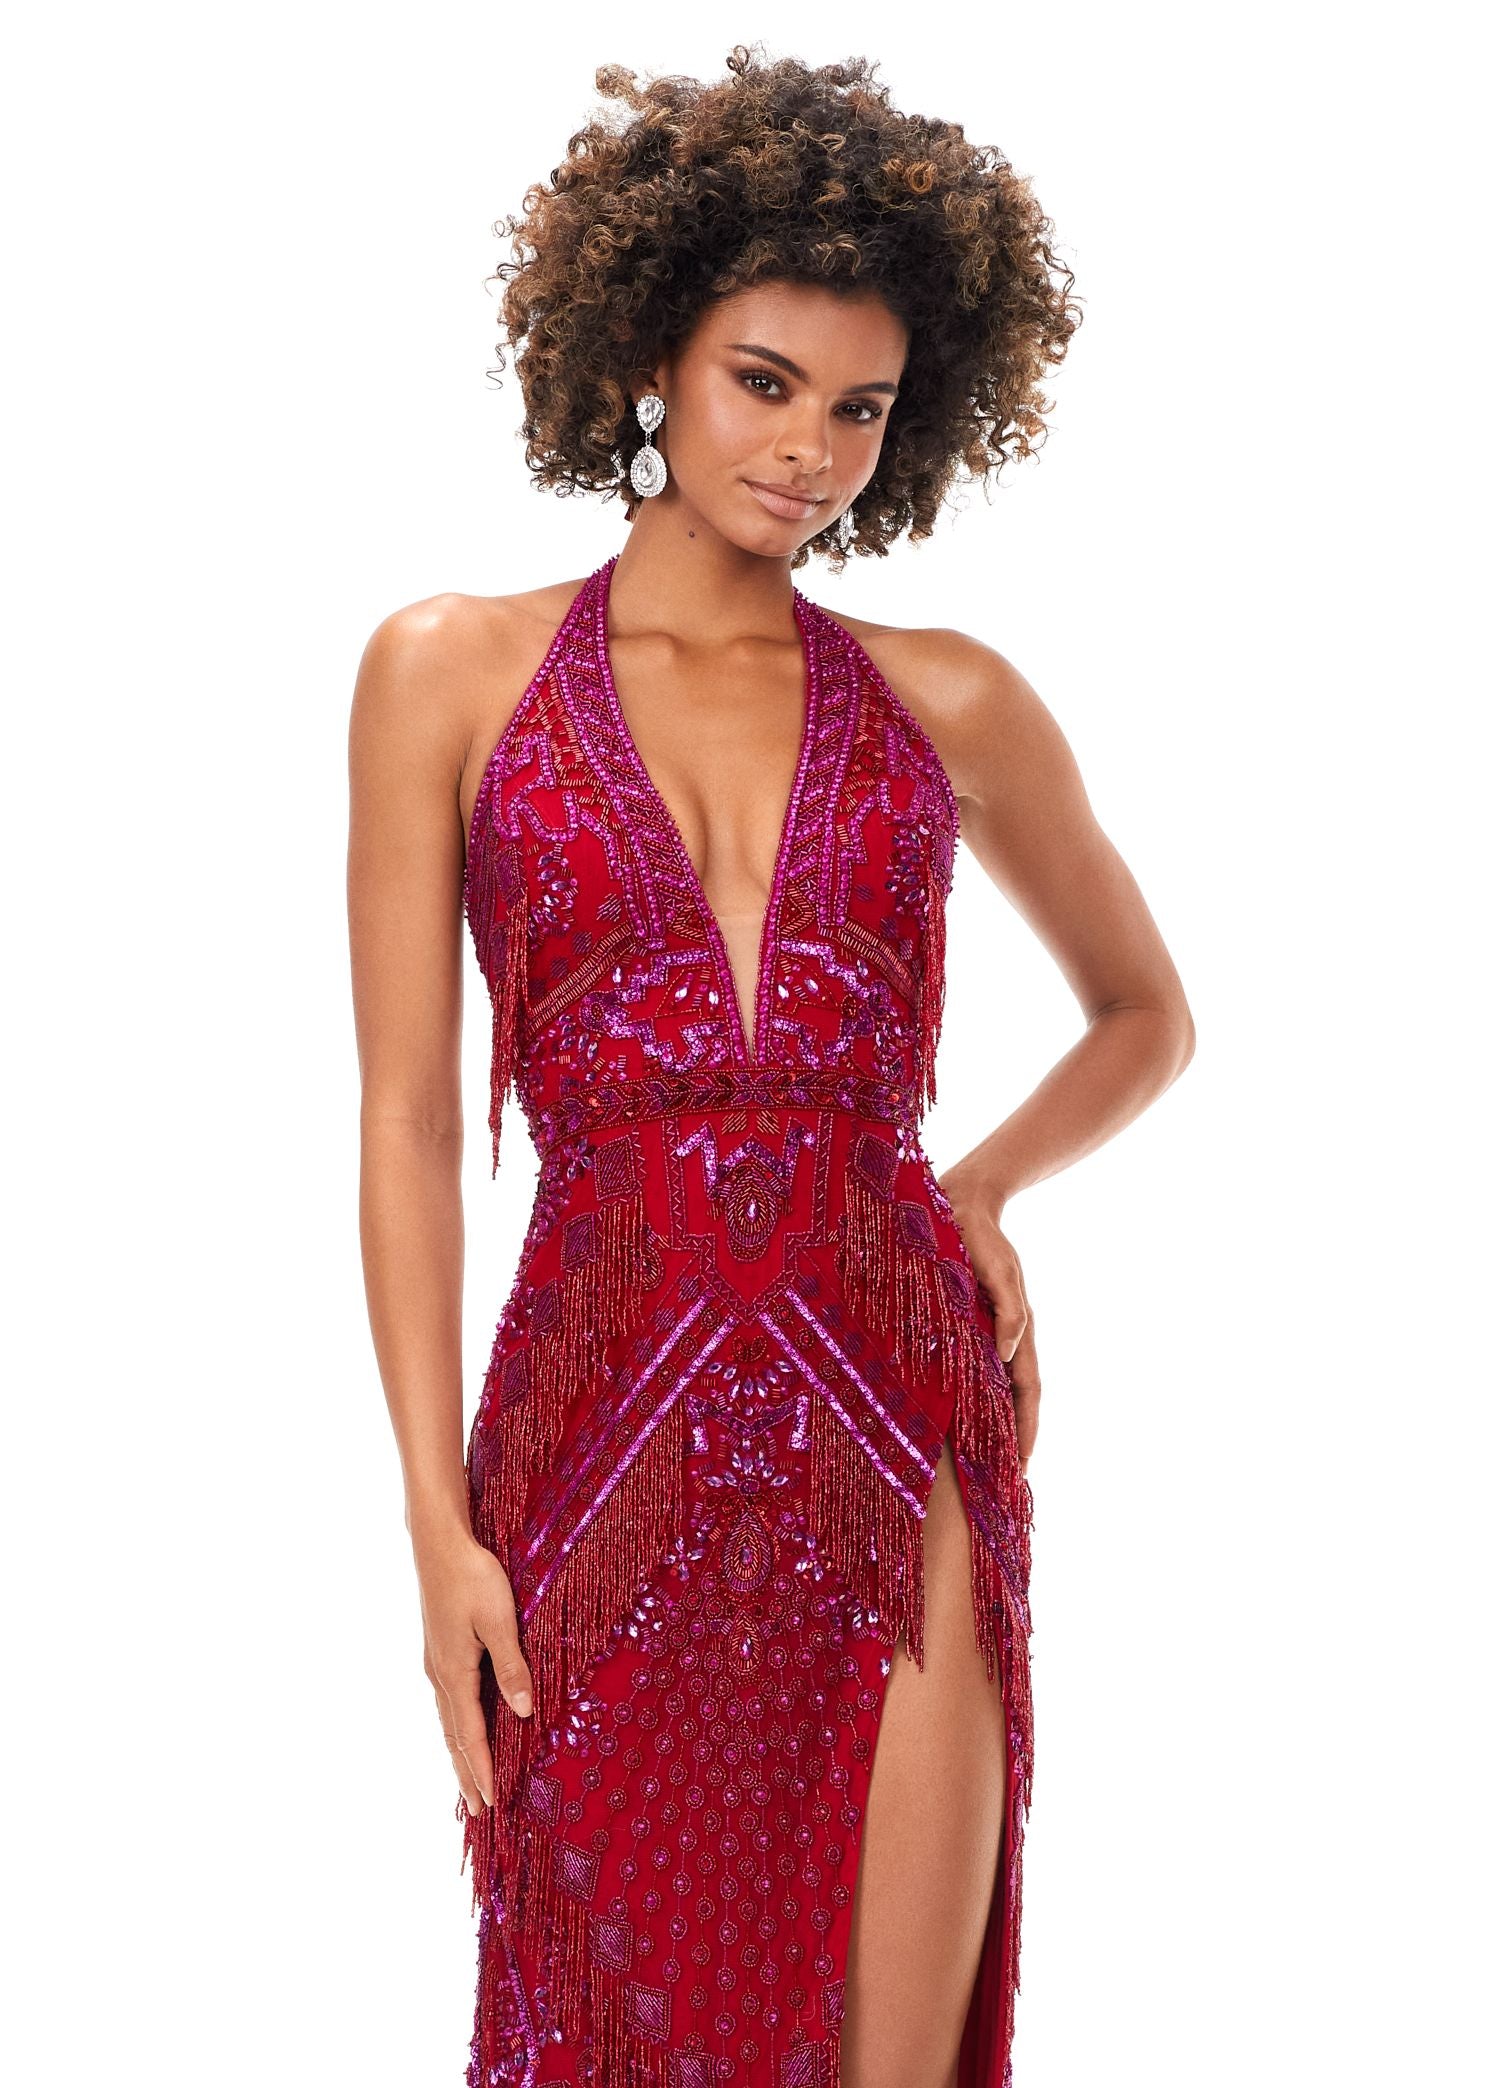 Ashley Lauren 11341 This gown has a deep v-neckline halter top, an intricate bead pattern and fringe accents. The gown is complete with an open back and side slit. Talk about perfection. V-Neckline Open Back Left Leg Slit Fully Hand Beaded COLORS: Red, Gold